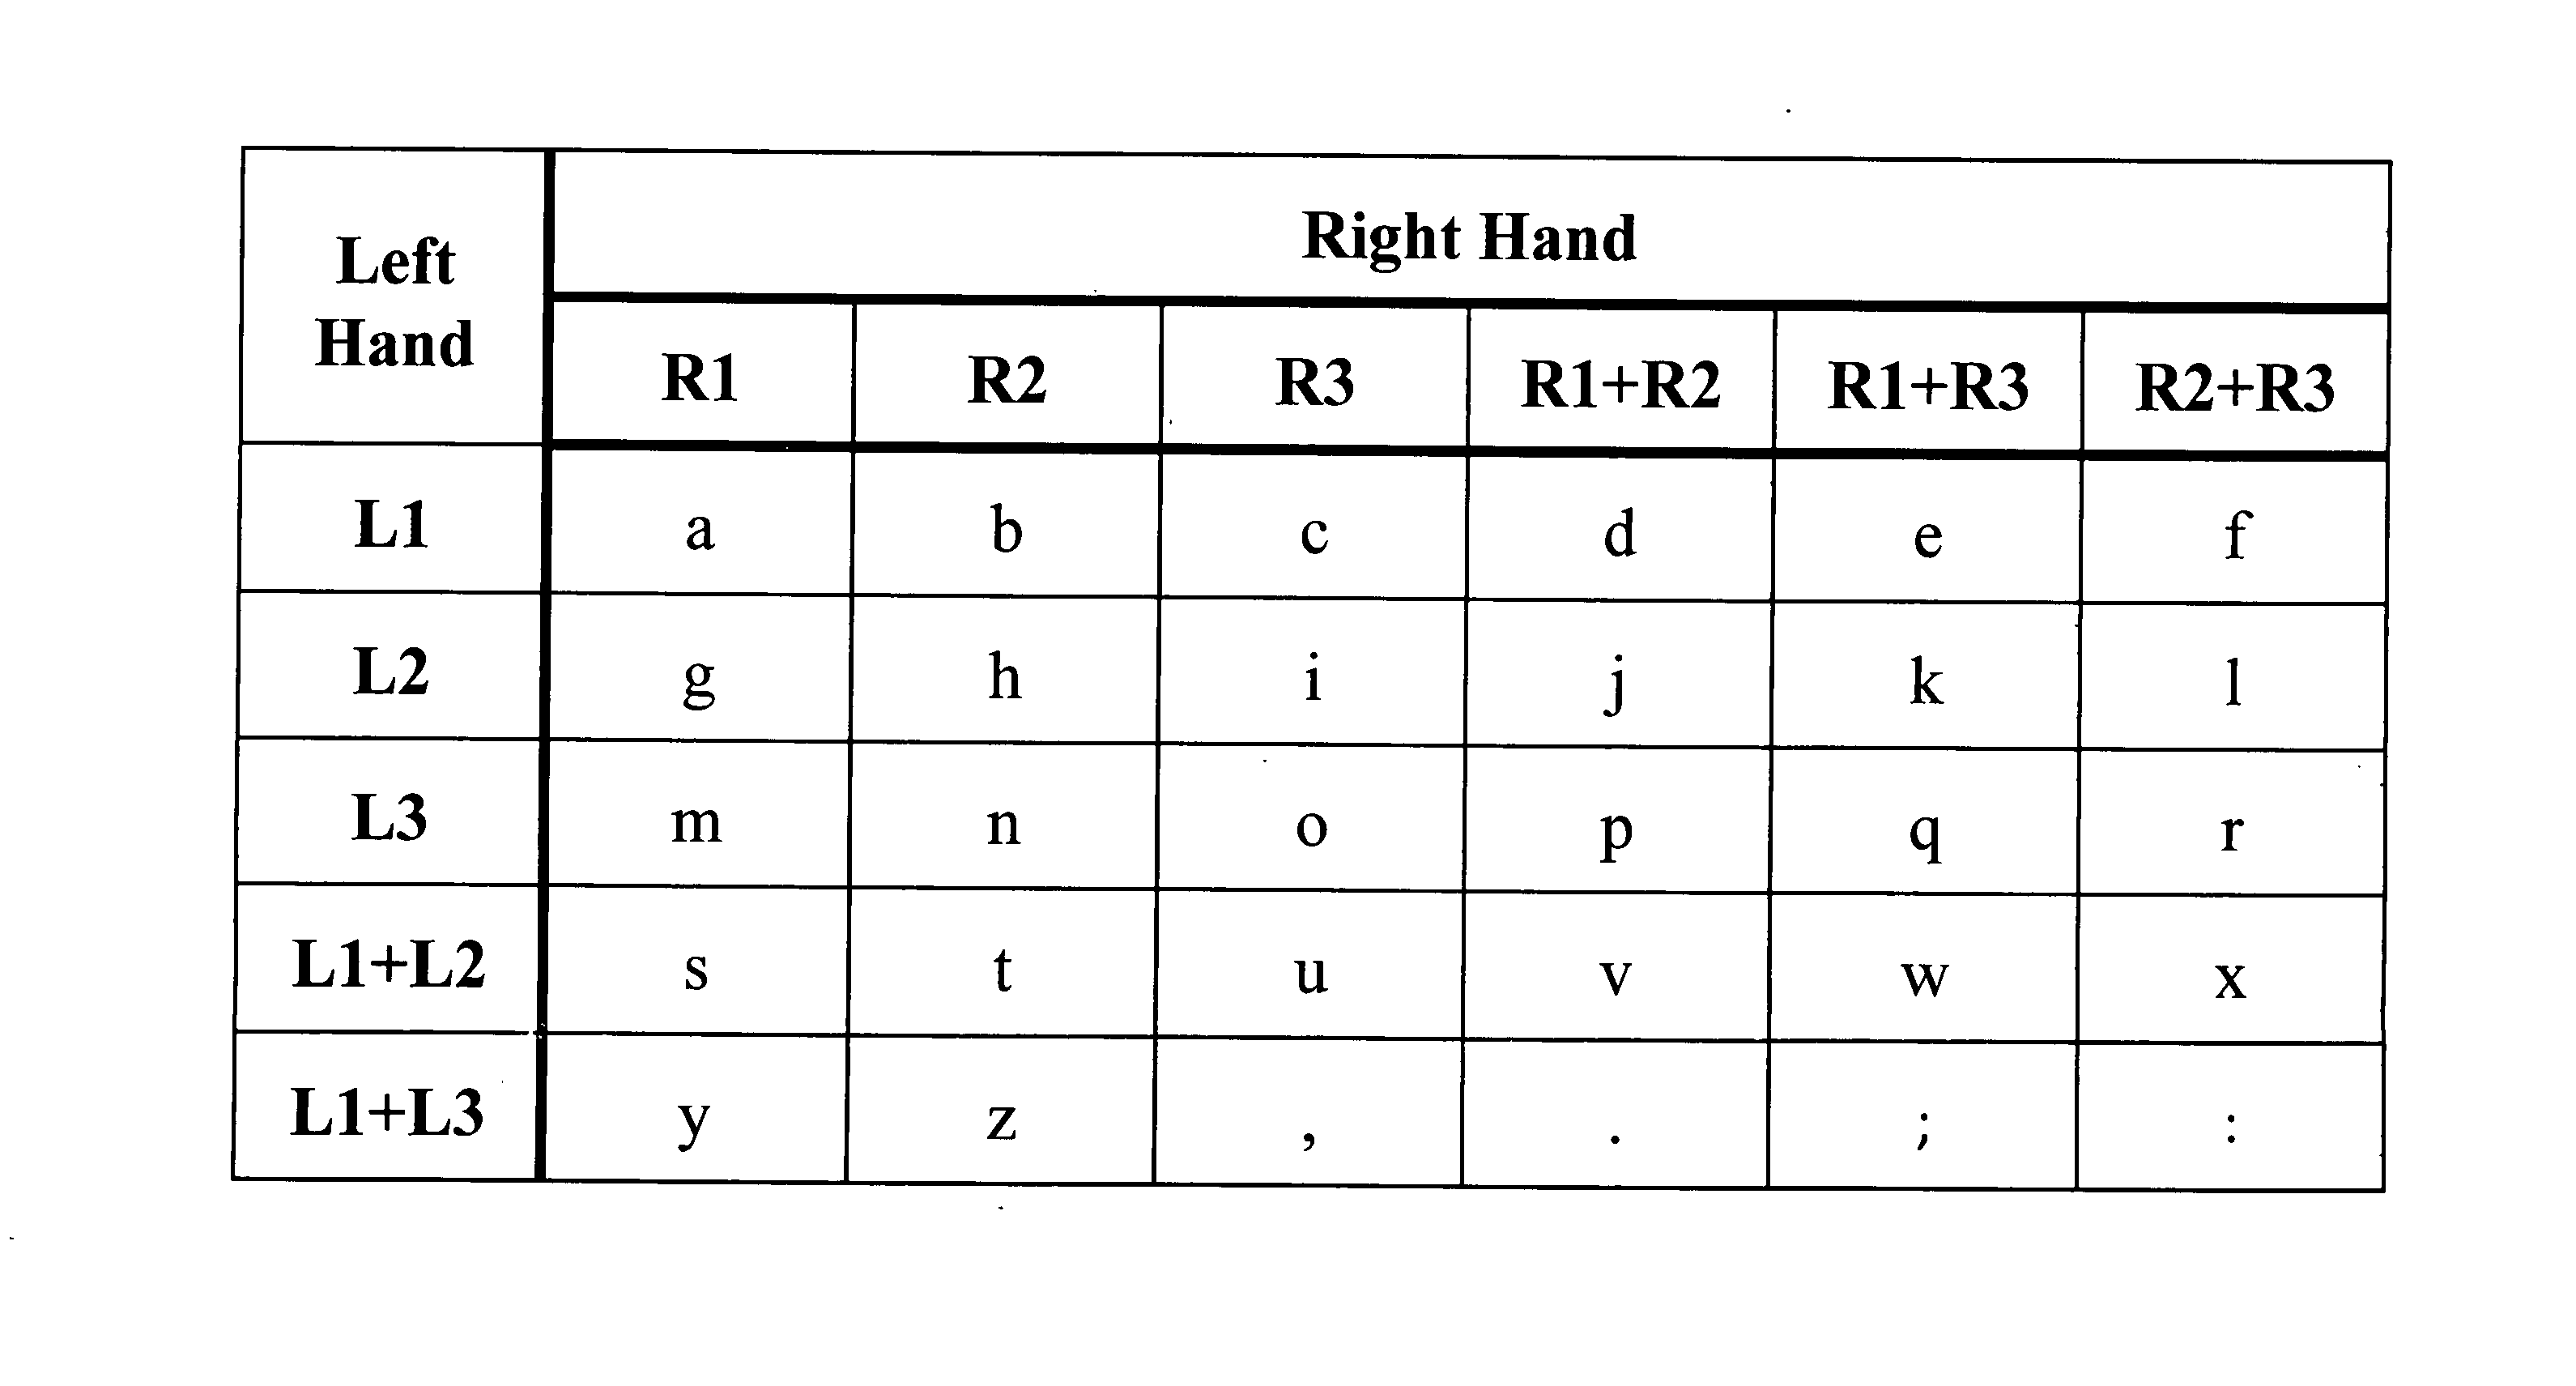 Two-stage, gesture enhanced input system for letters, numbers, and characters